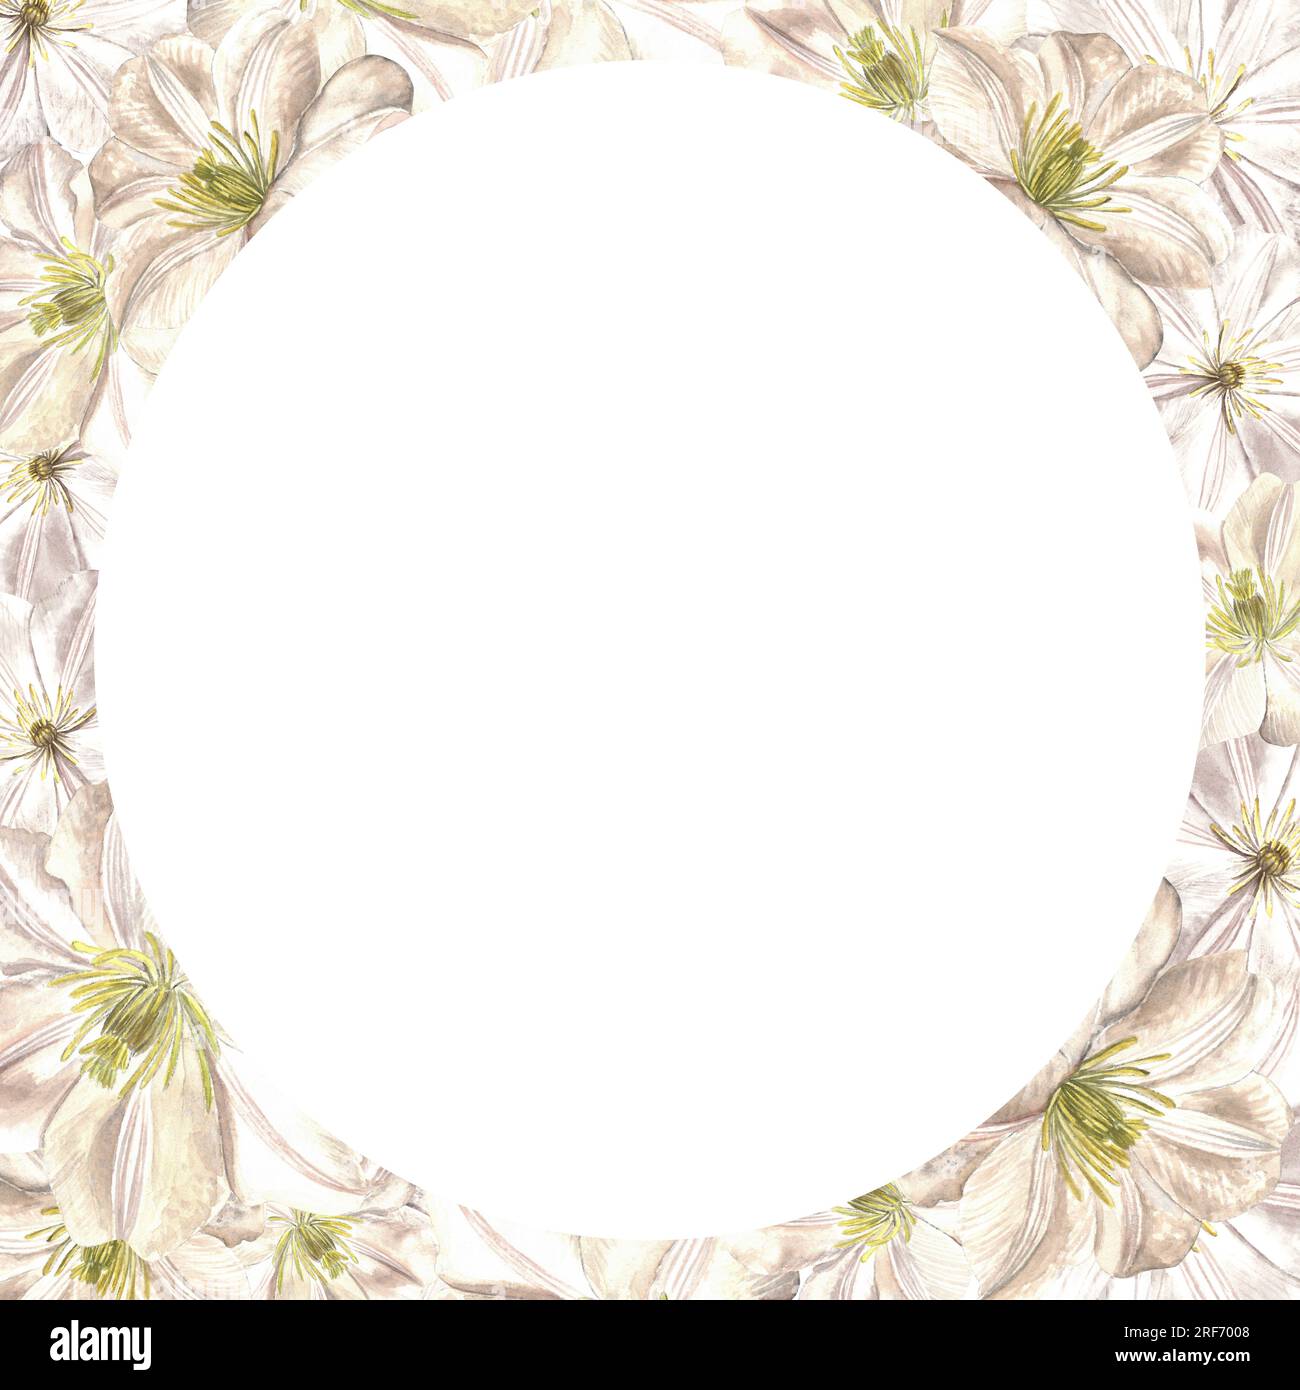 Watercolor illustration of clematis flowers. Round frame isolated on a white background made by hand Stock Photo